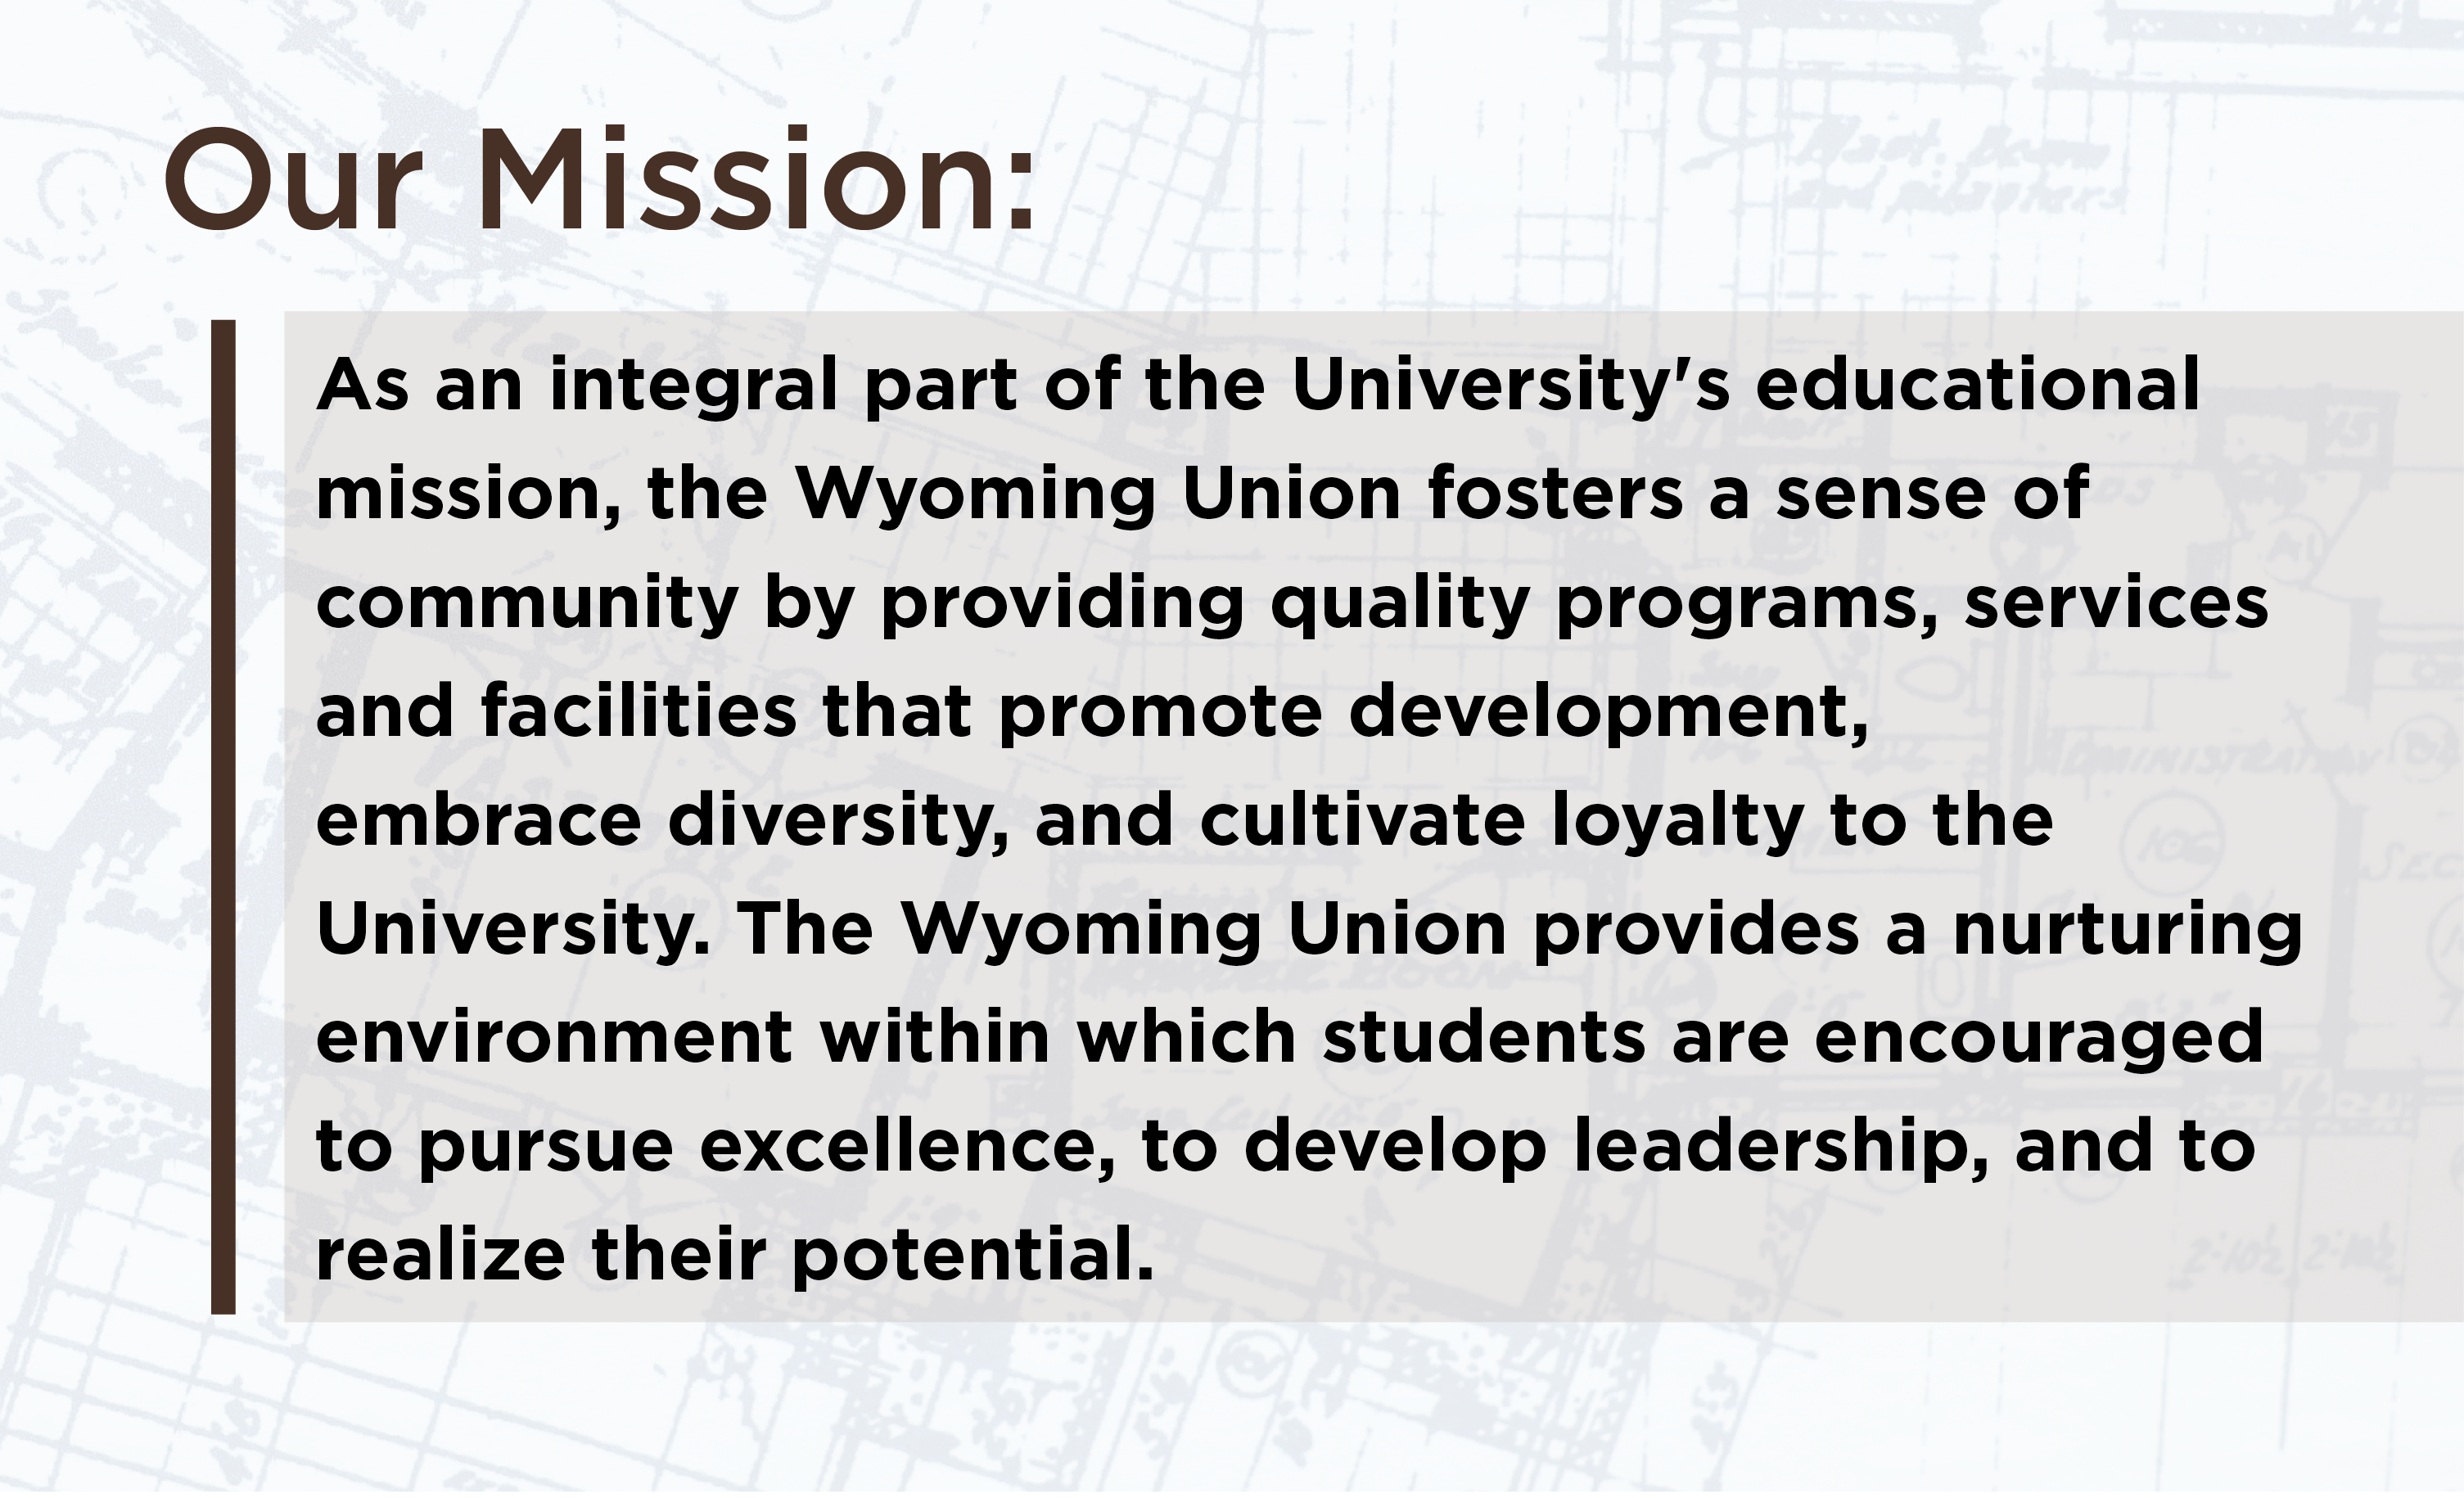 Our Mission: As an integral part of the University's educational    mission, the Wyoming Union fosters a sense of    community by providing quality programs, services    and facilities that promote development,    embrace diversity, and cultivate loyalty to the    University. The Wyoming Union provides a nurturing    environment within which students are encouraged    to pursue excellence, to develop leadership, and to realize their potential.